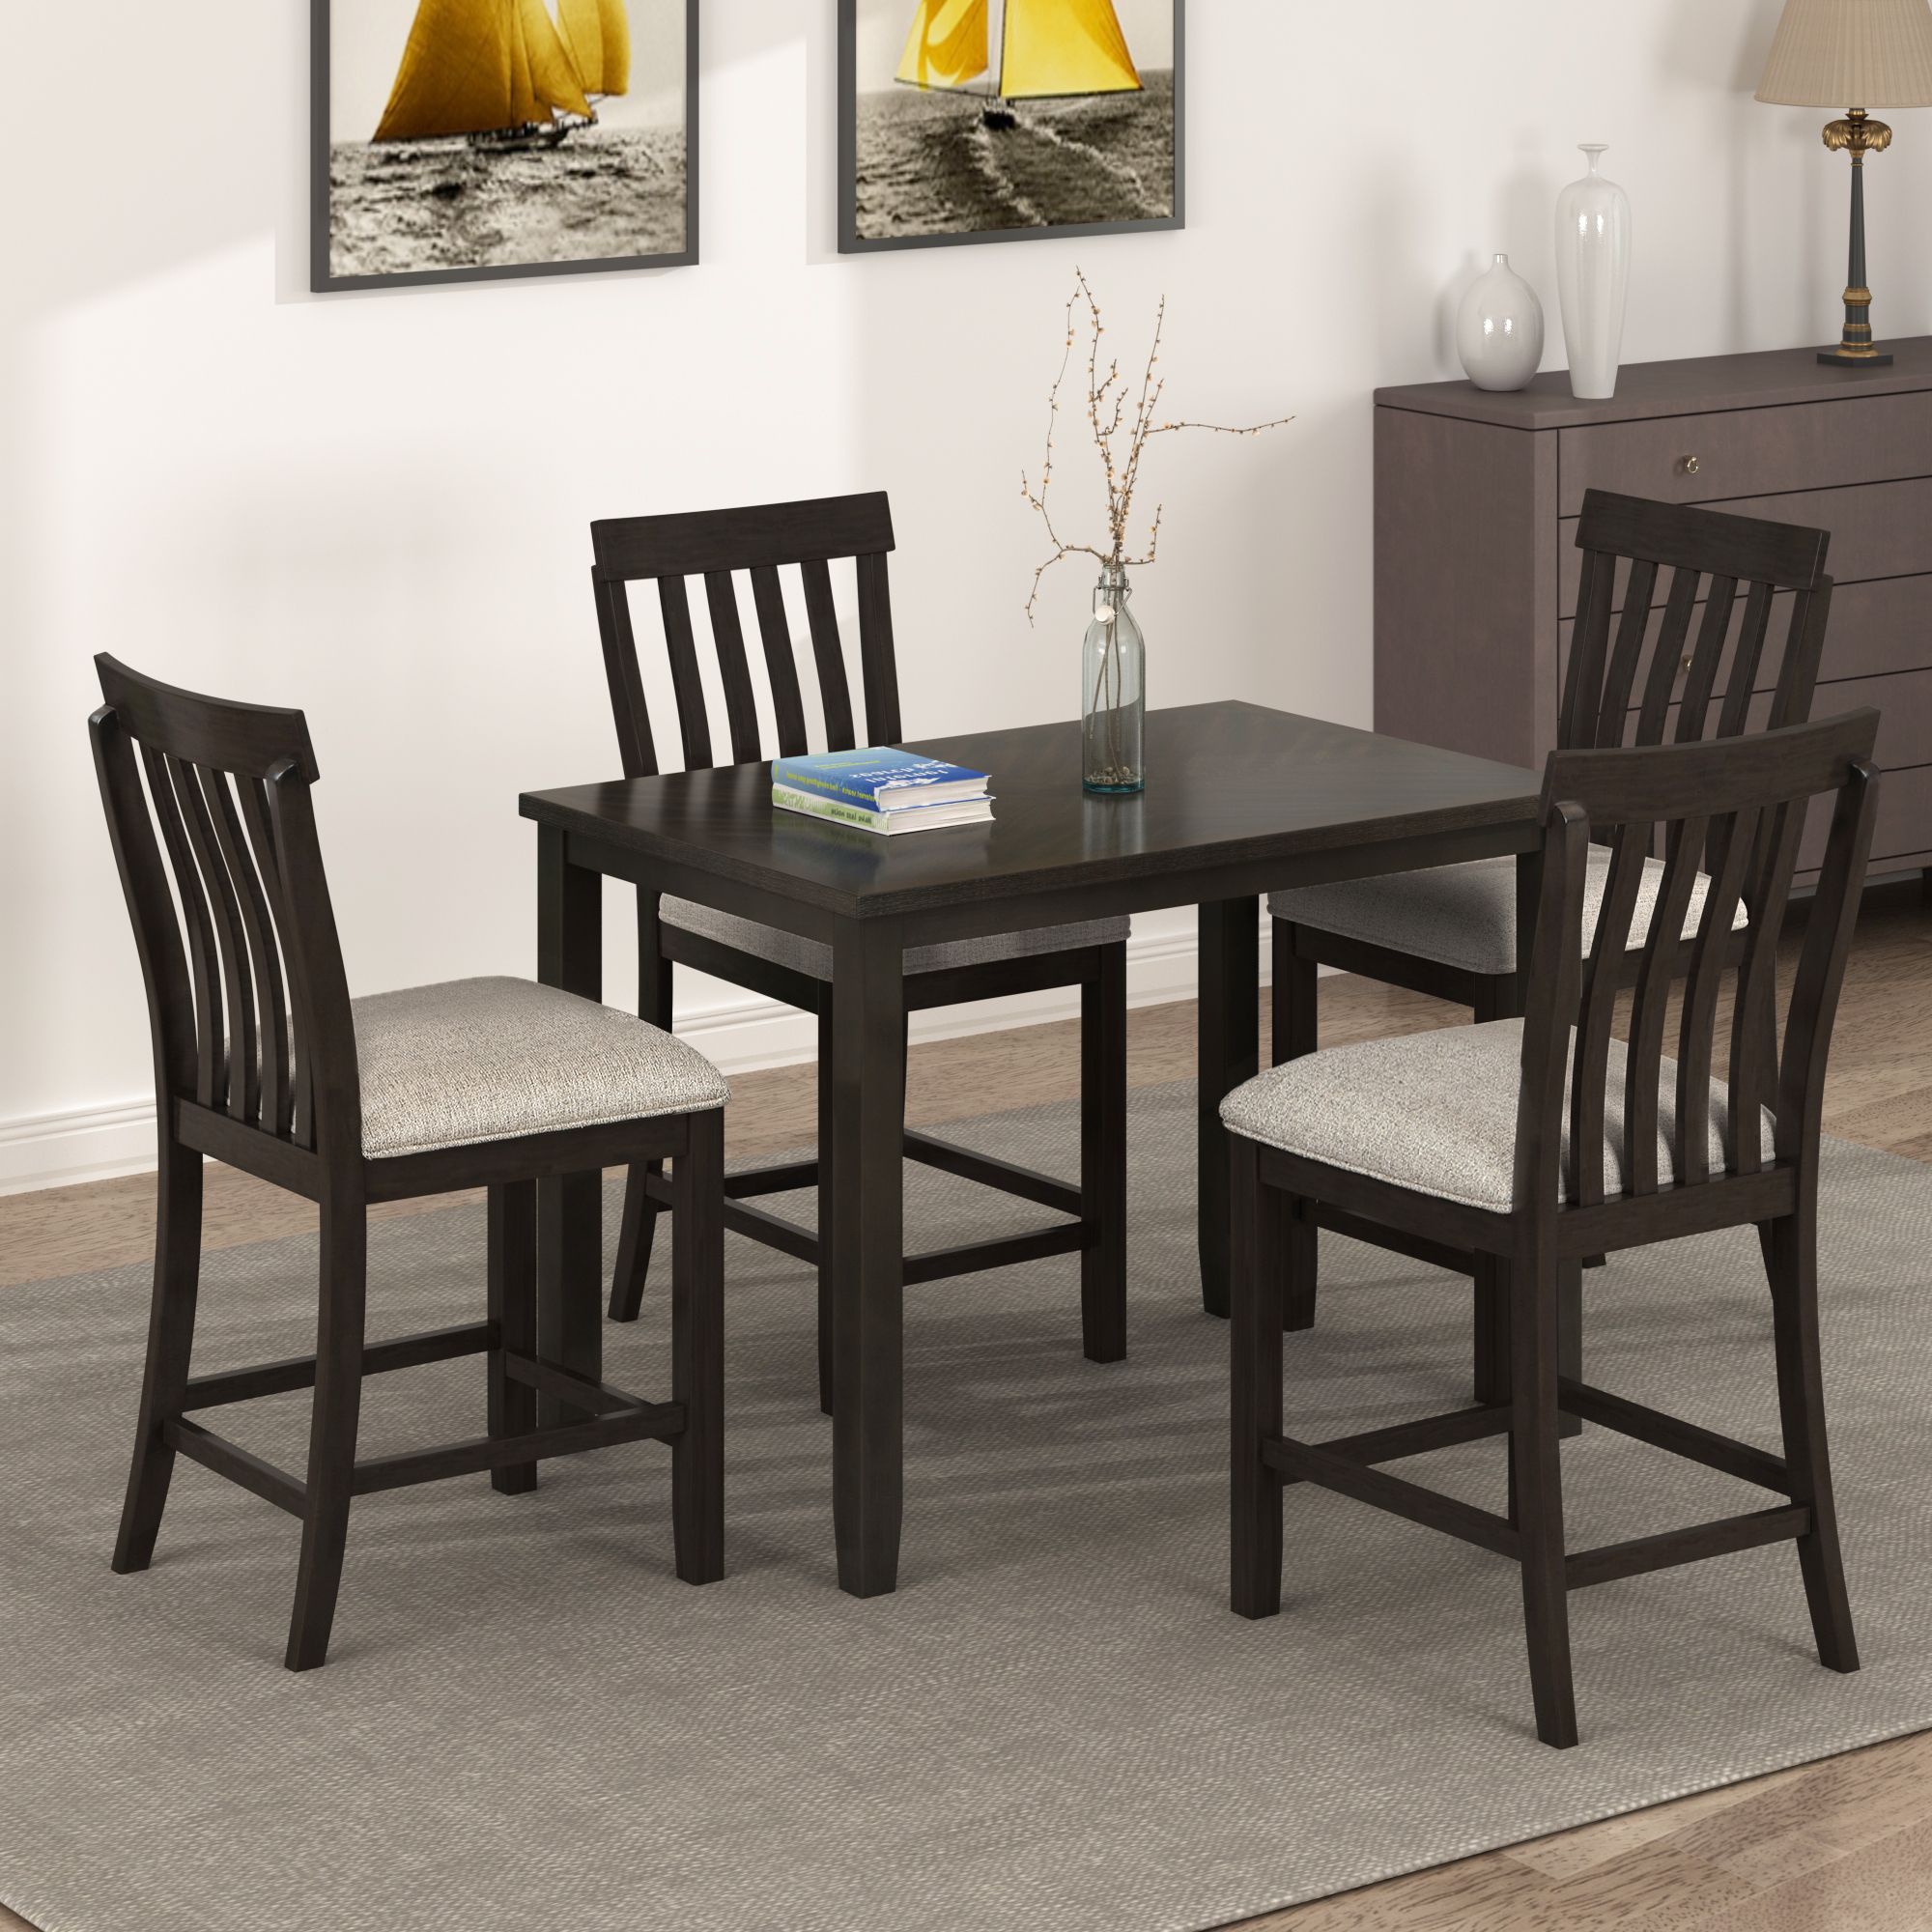 Breakfast Nook Table Set, Amway Contemporary Counter Height Dining Inside Wood Bistro Table And Chairs Sets (View 1 of 15)